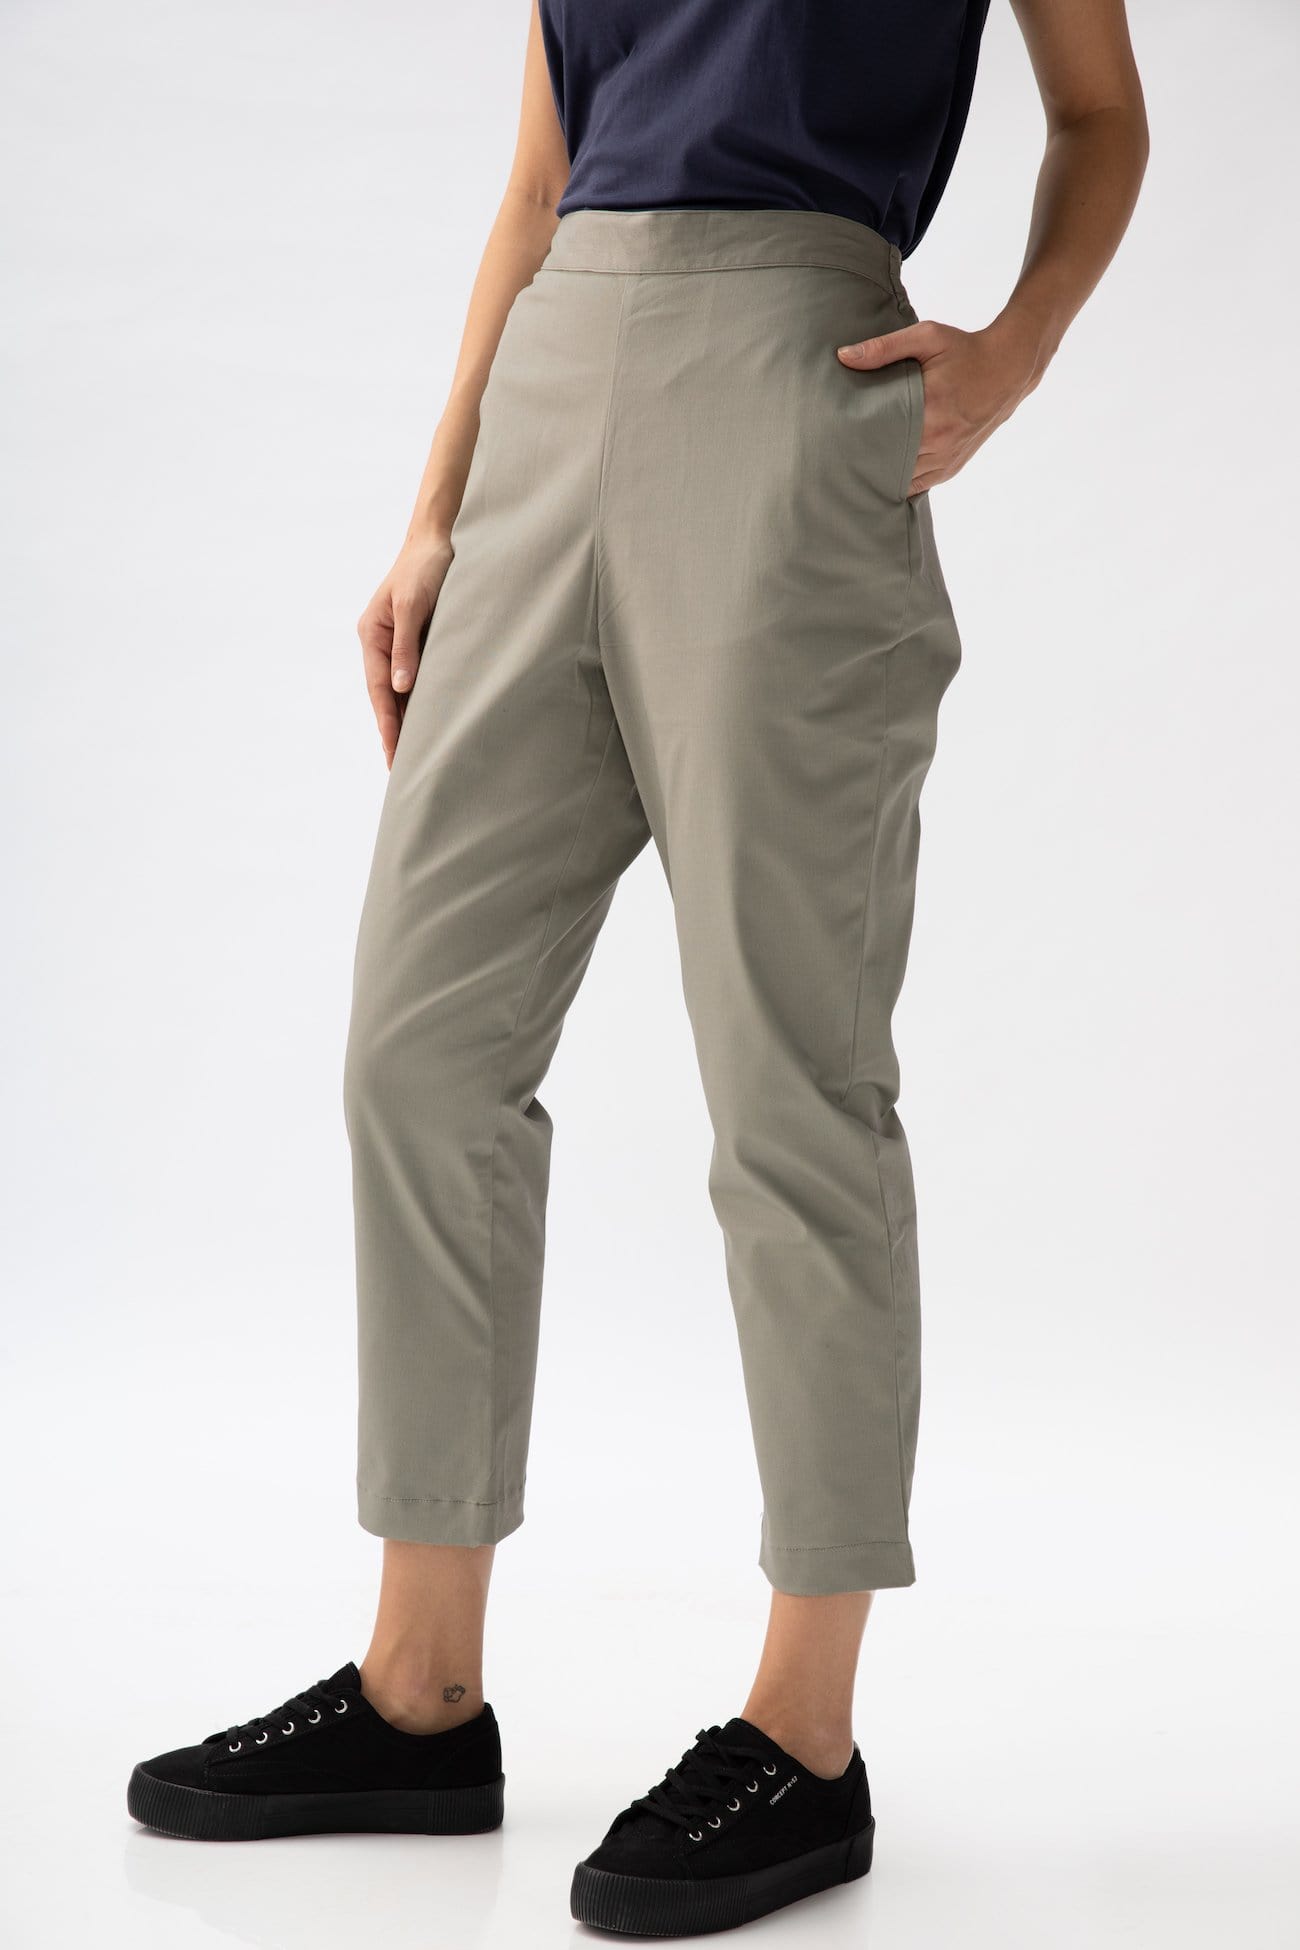 Saltpetre womens casual and formal wear pants, in khaki-grey, 100% organic cotton fabric, indo-western wear in ankle length pants and deep pockets